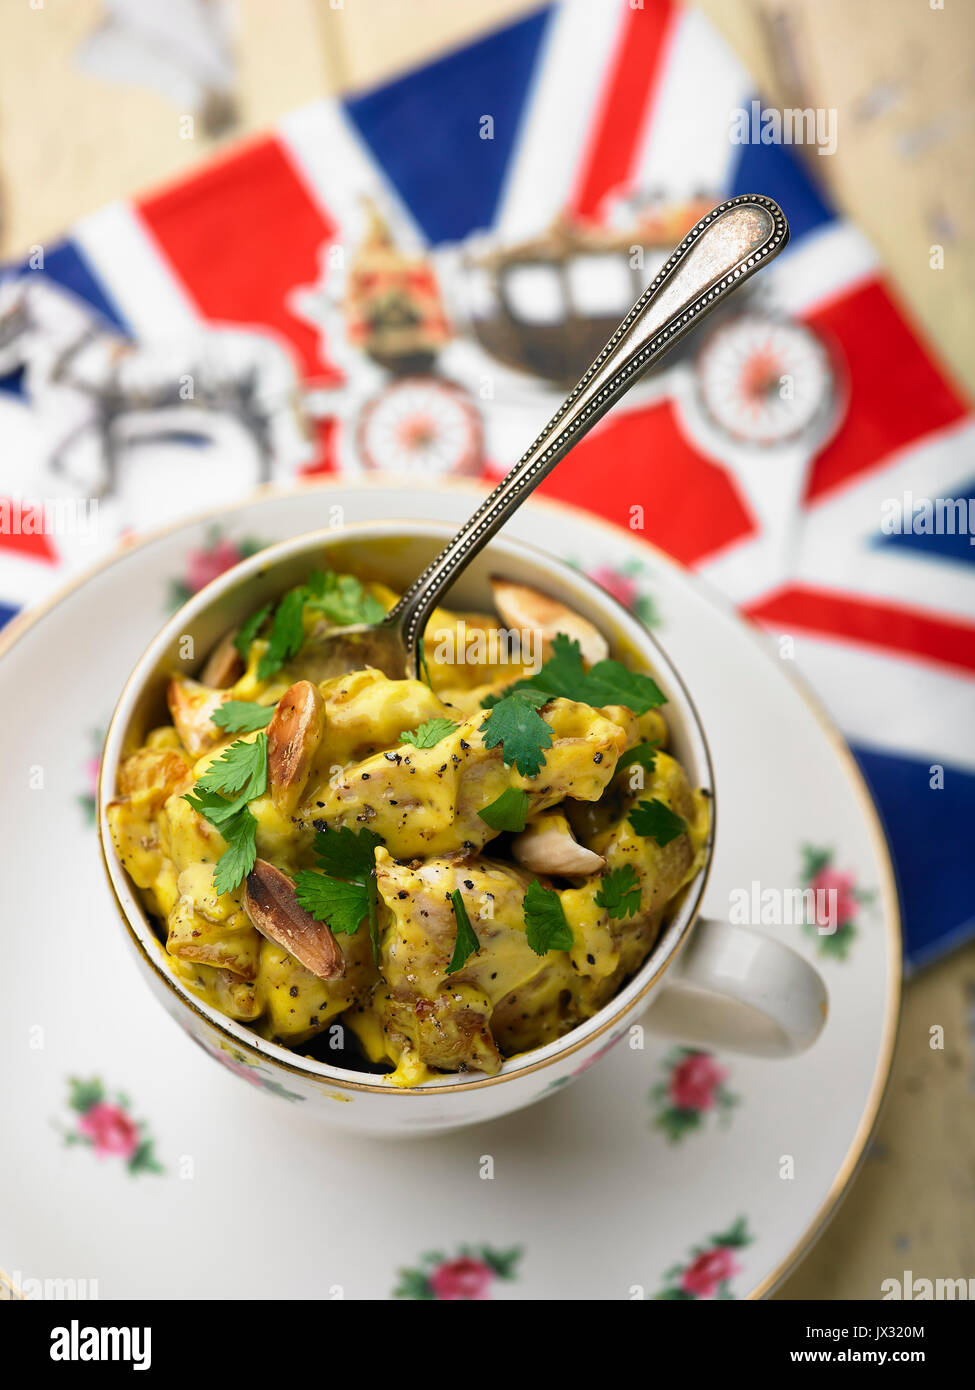 Coronation chicken in tea cup and royal guard and union jack serviette Stock Photo